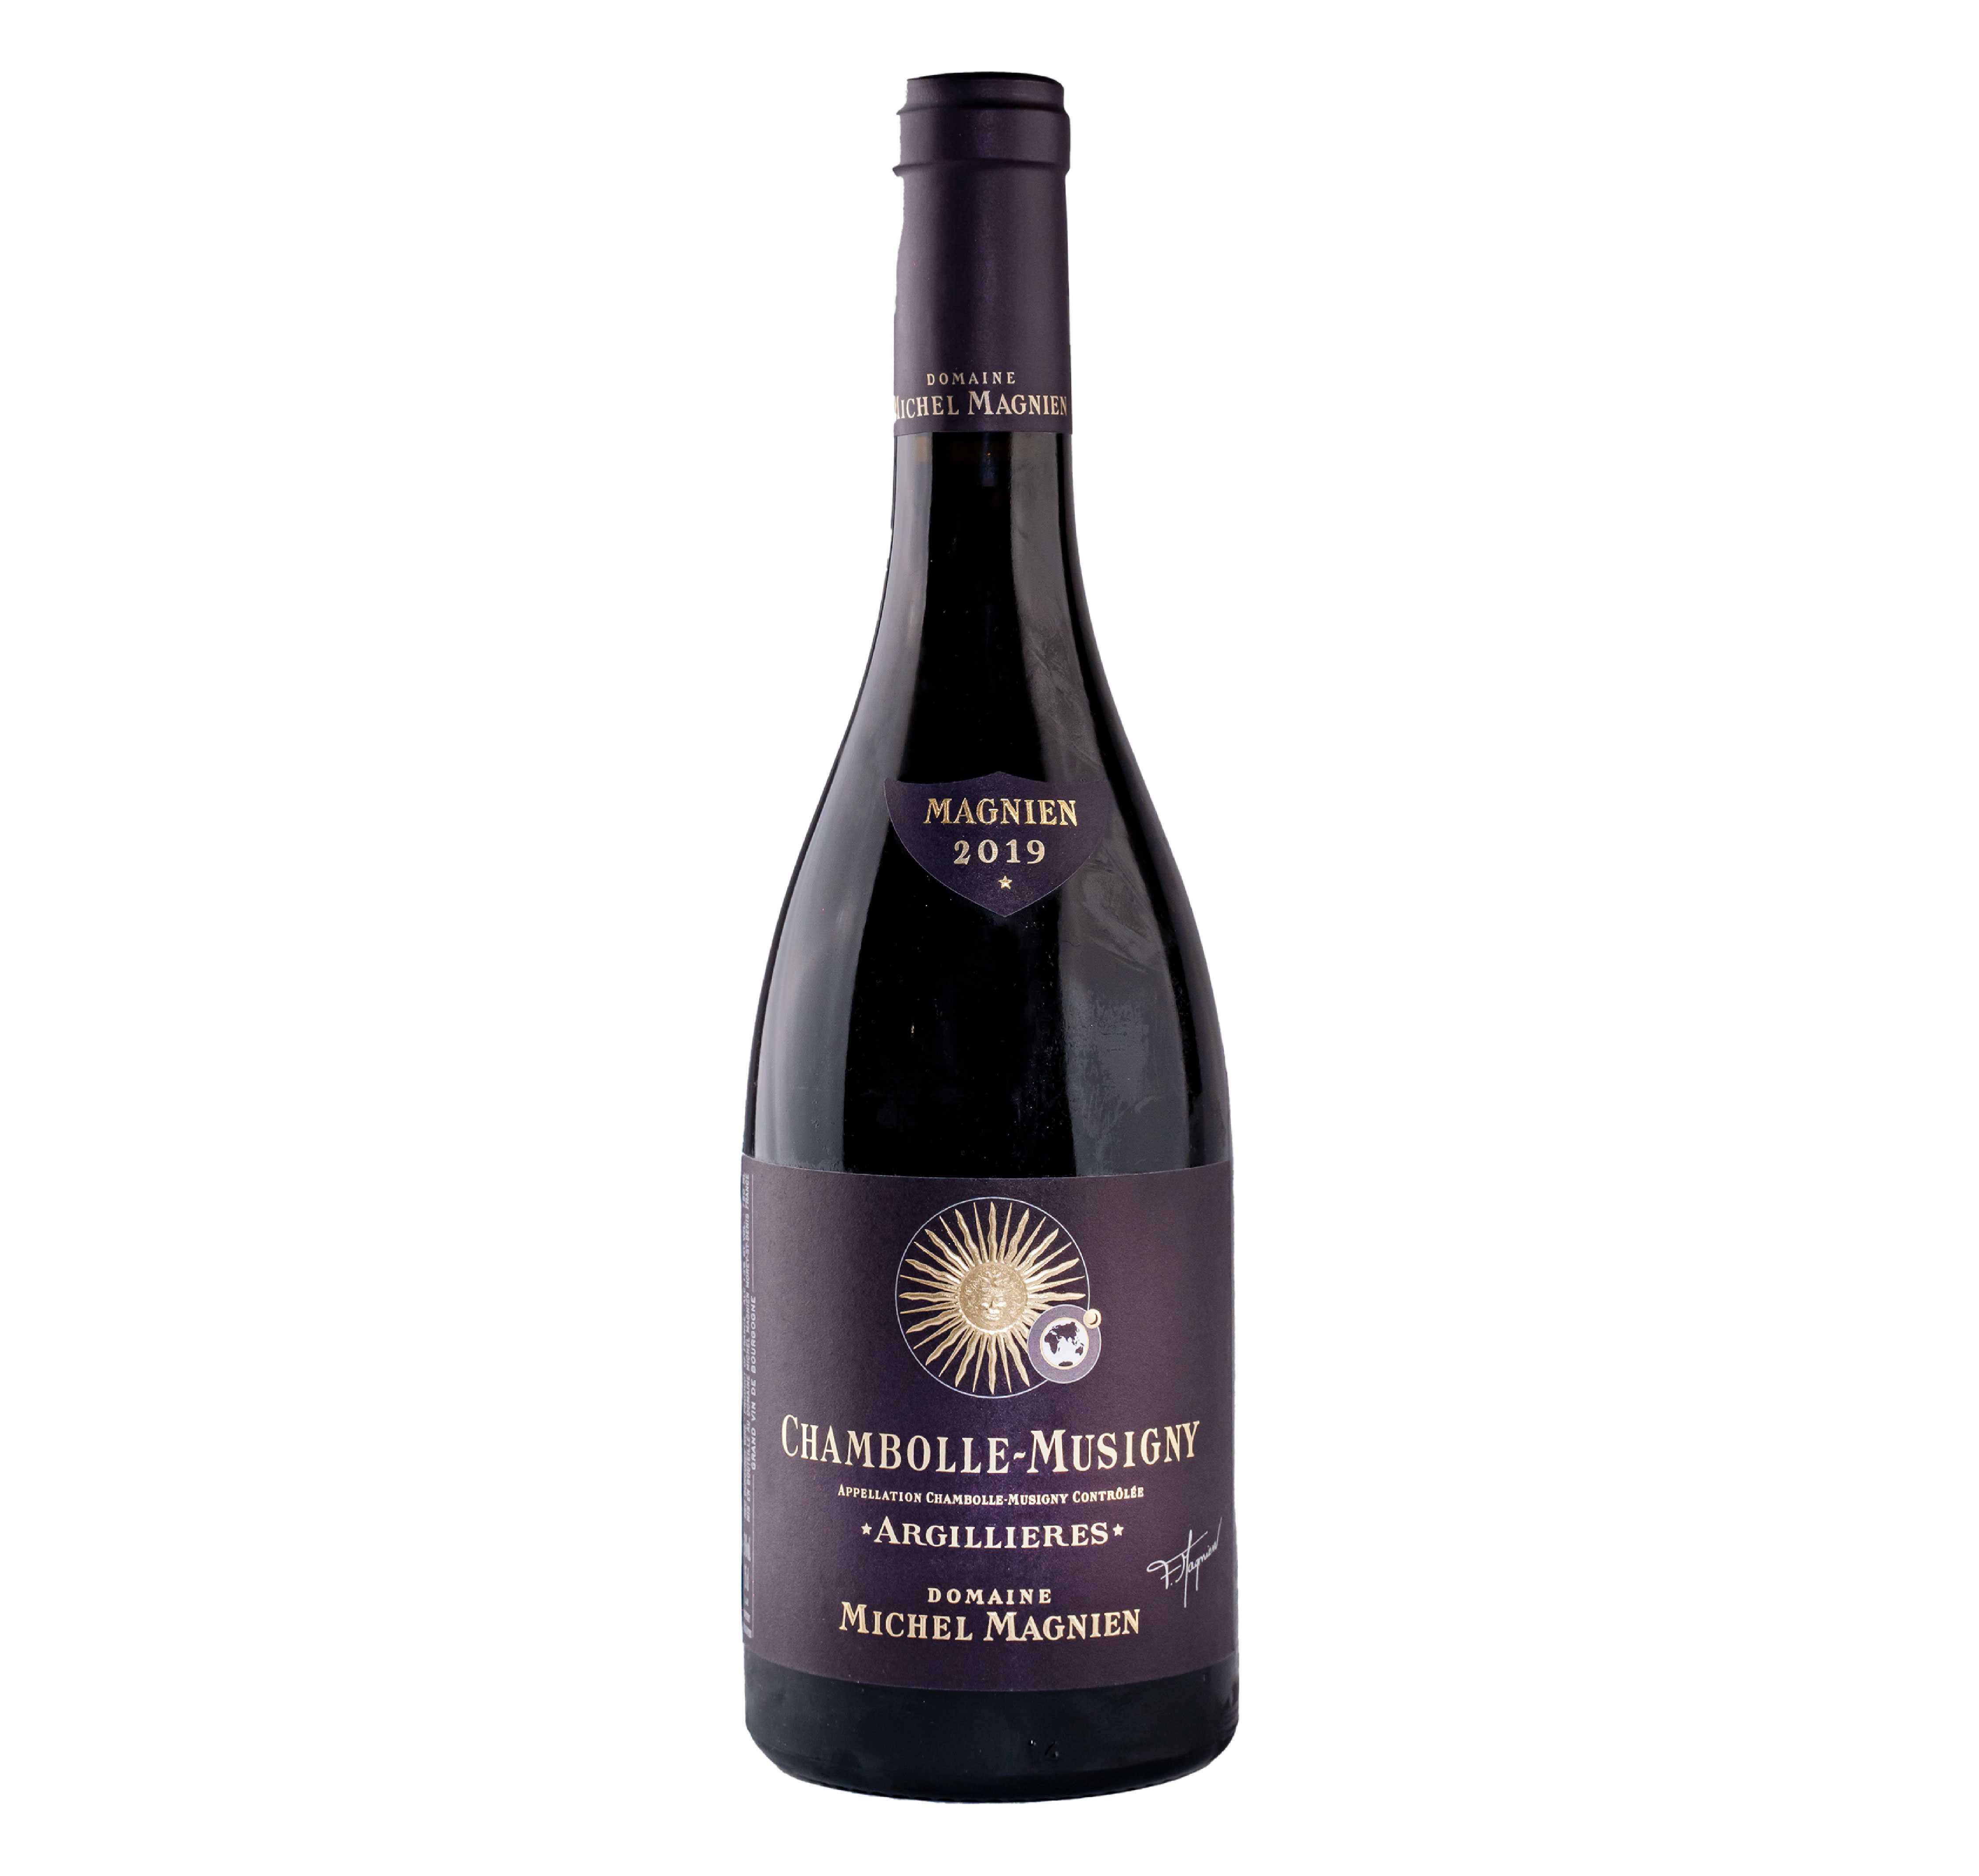 Domaine Michel Magnien Chambolle-Musigny "Argillieres" 2019